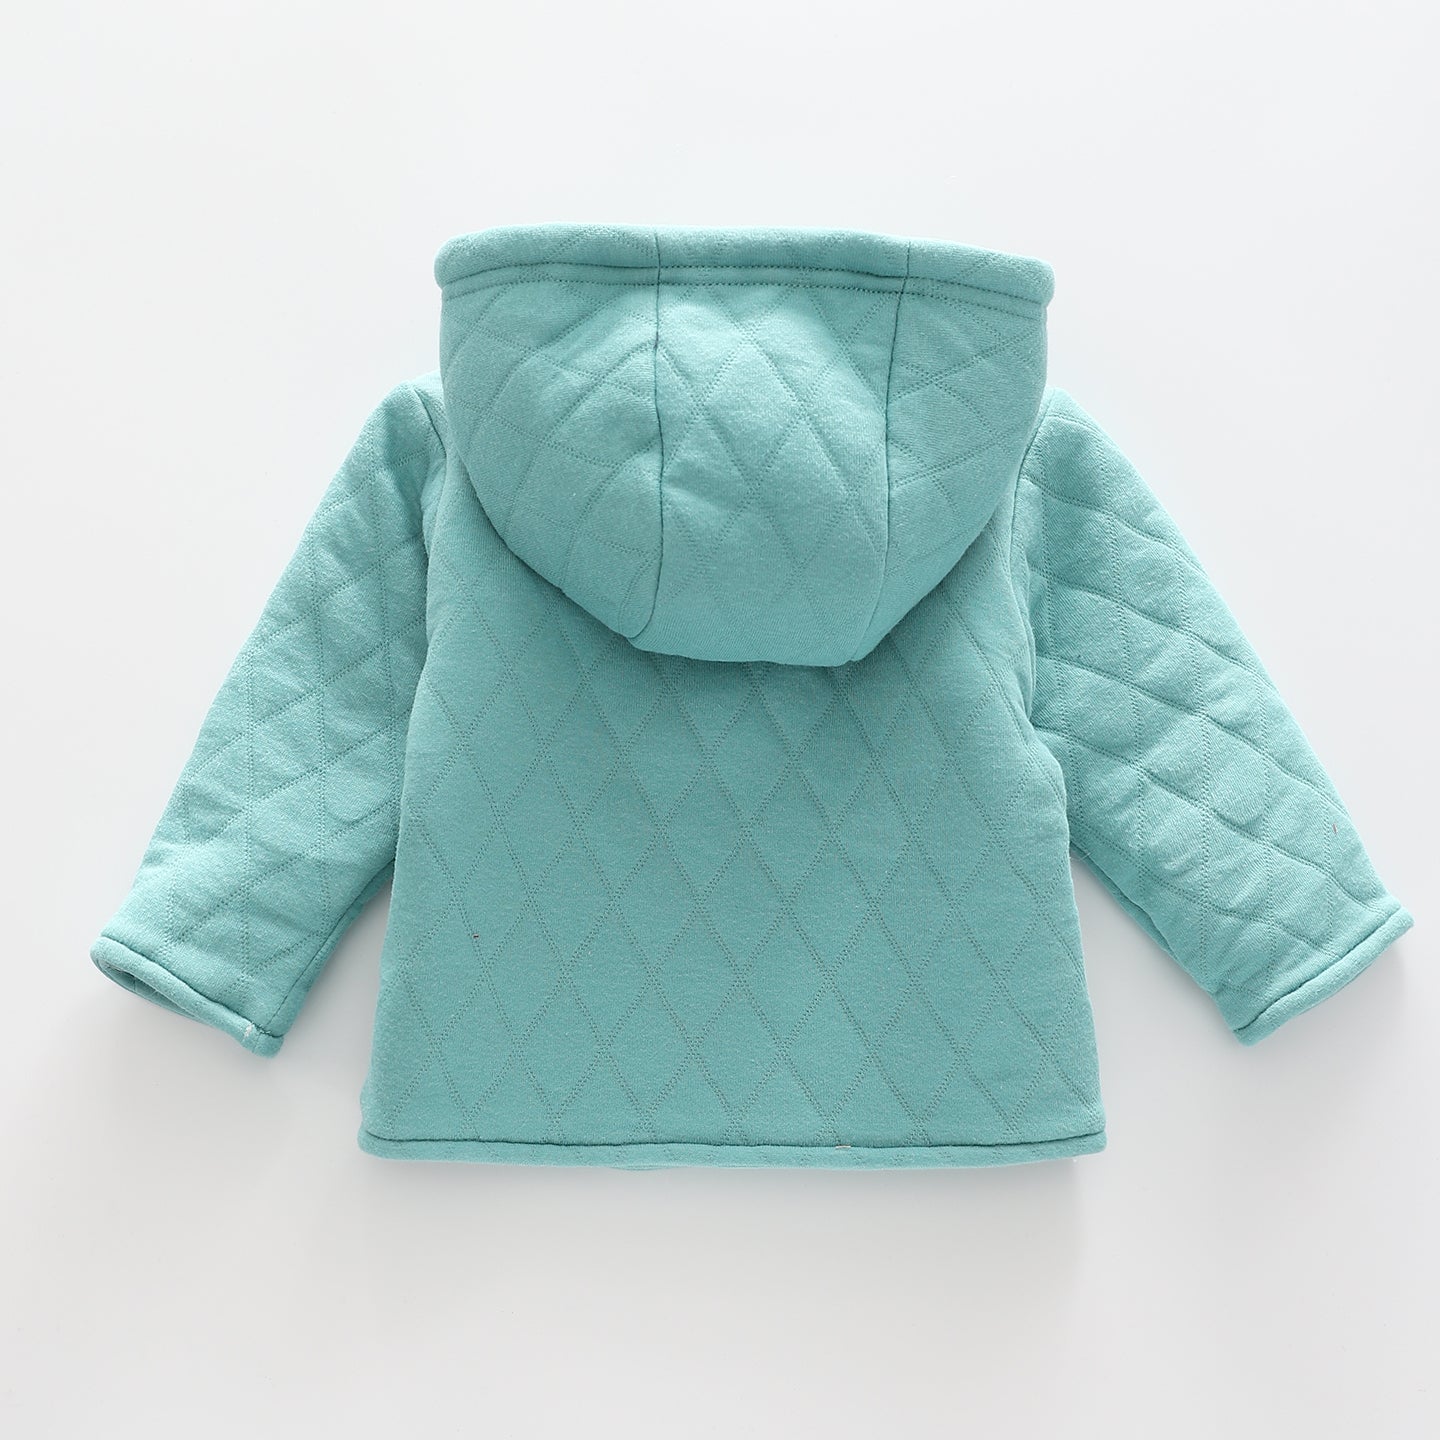 Baby Boys' Green Quilted Jacket